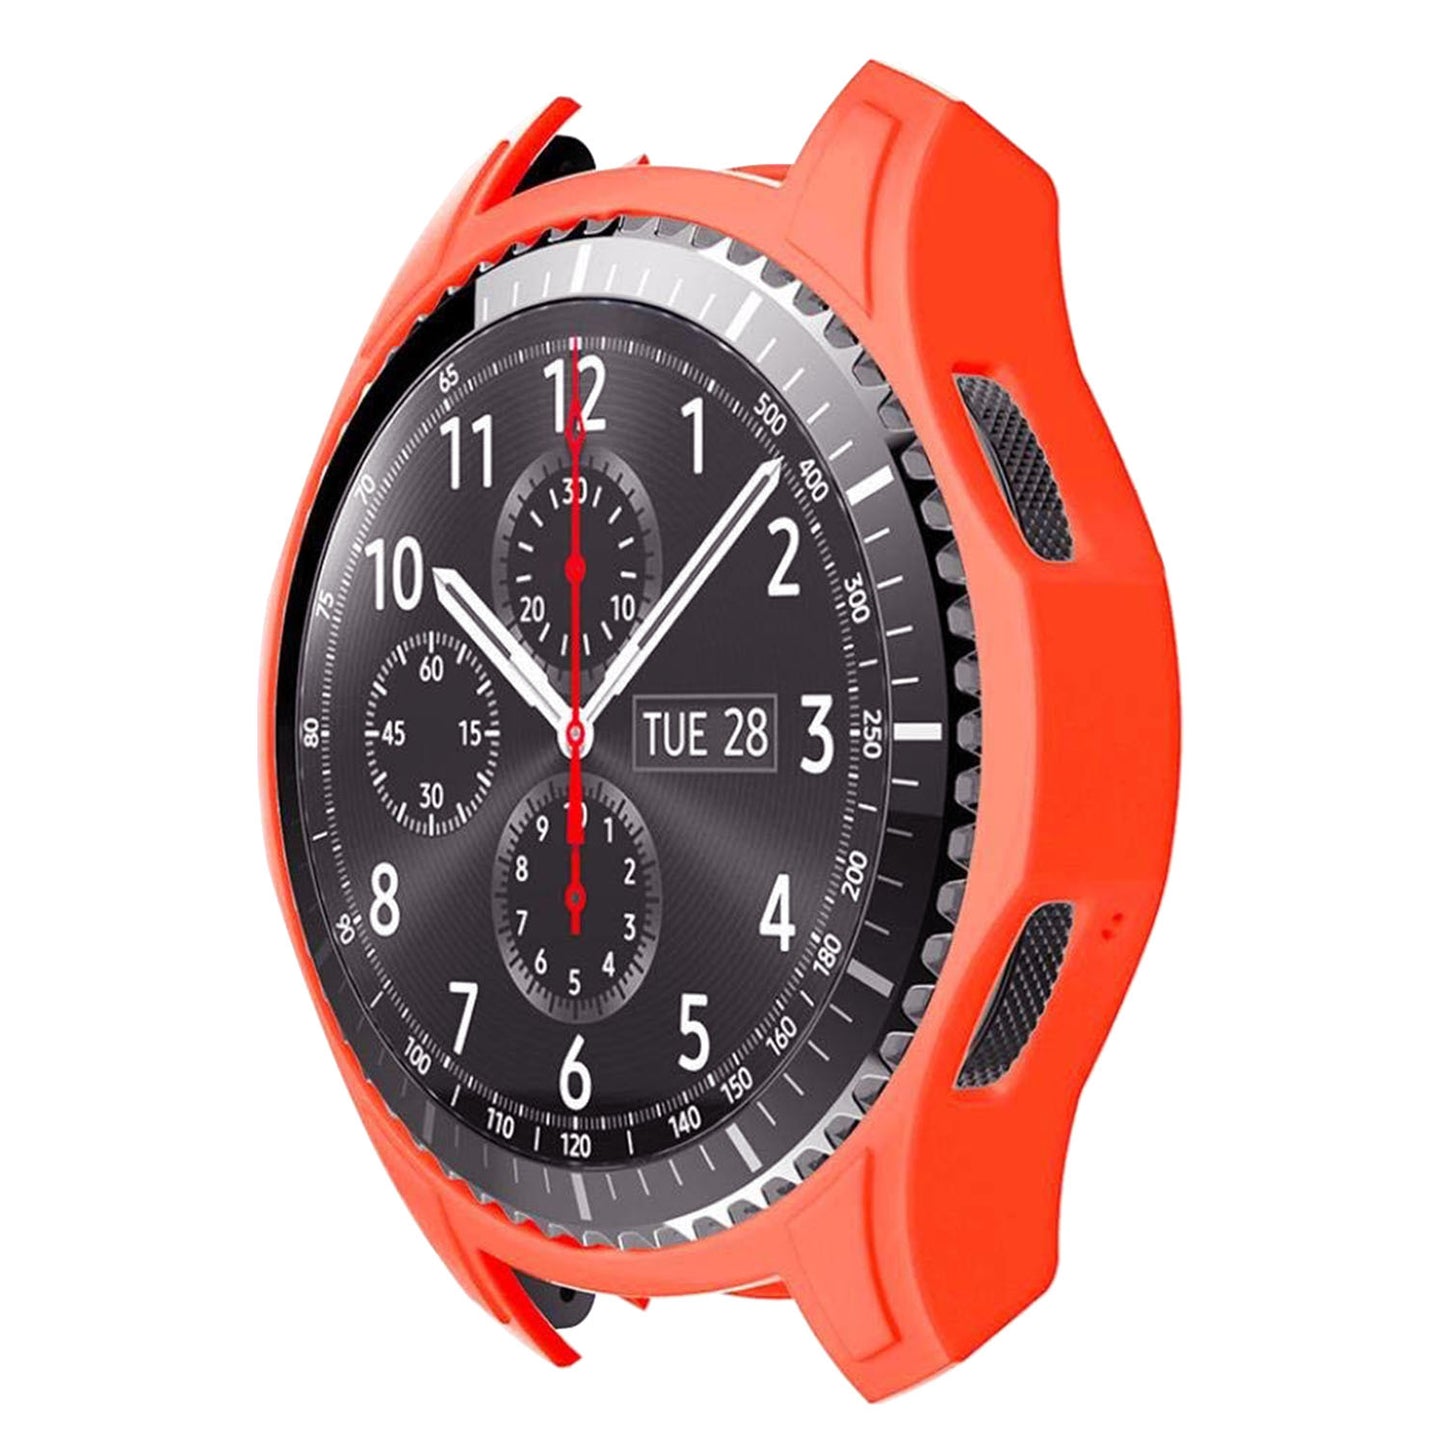 Rubber Protective Case for Samsung Gear S3